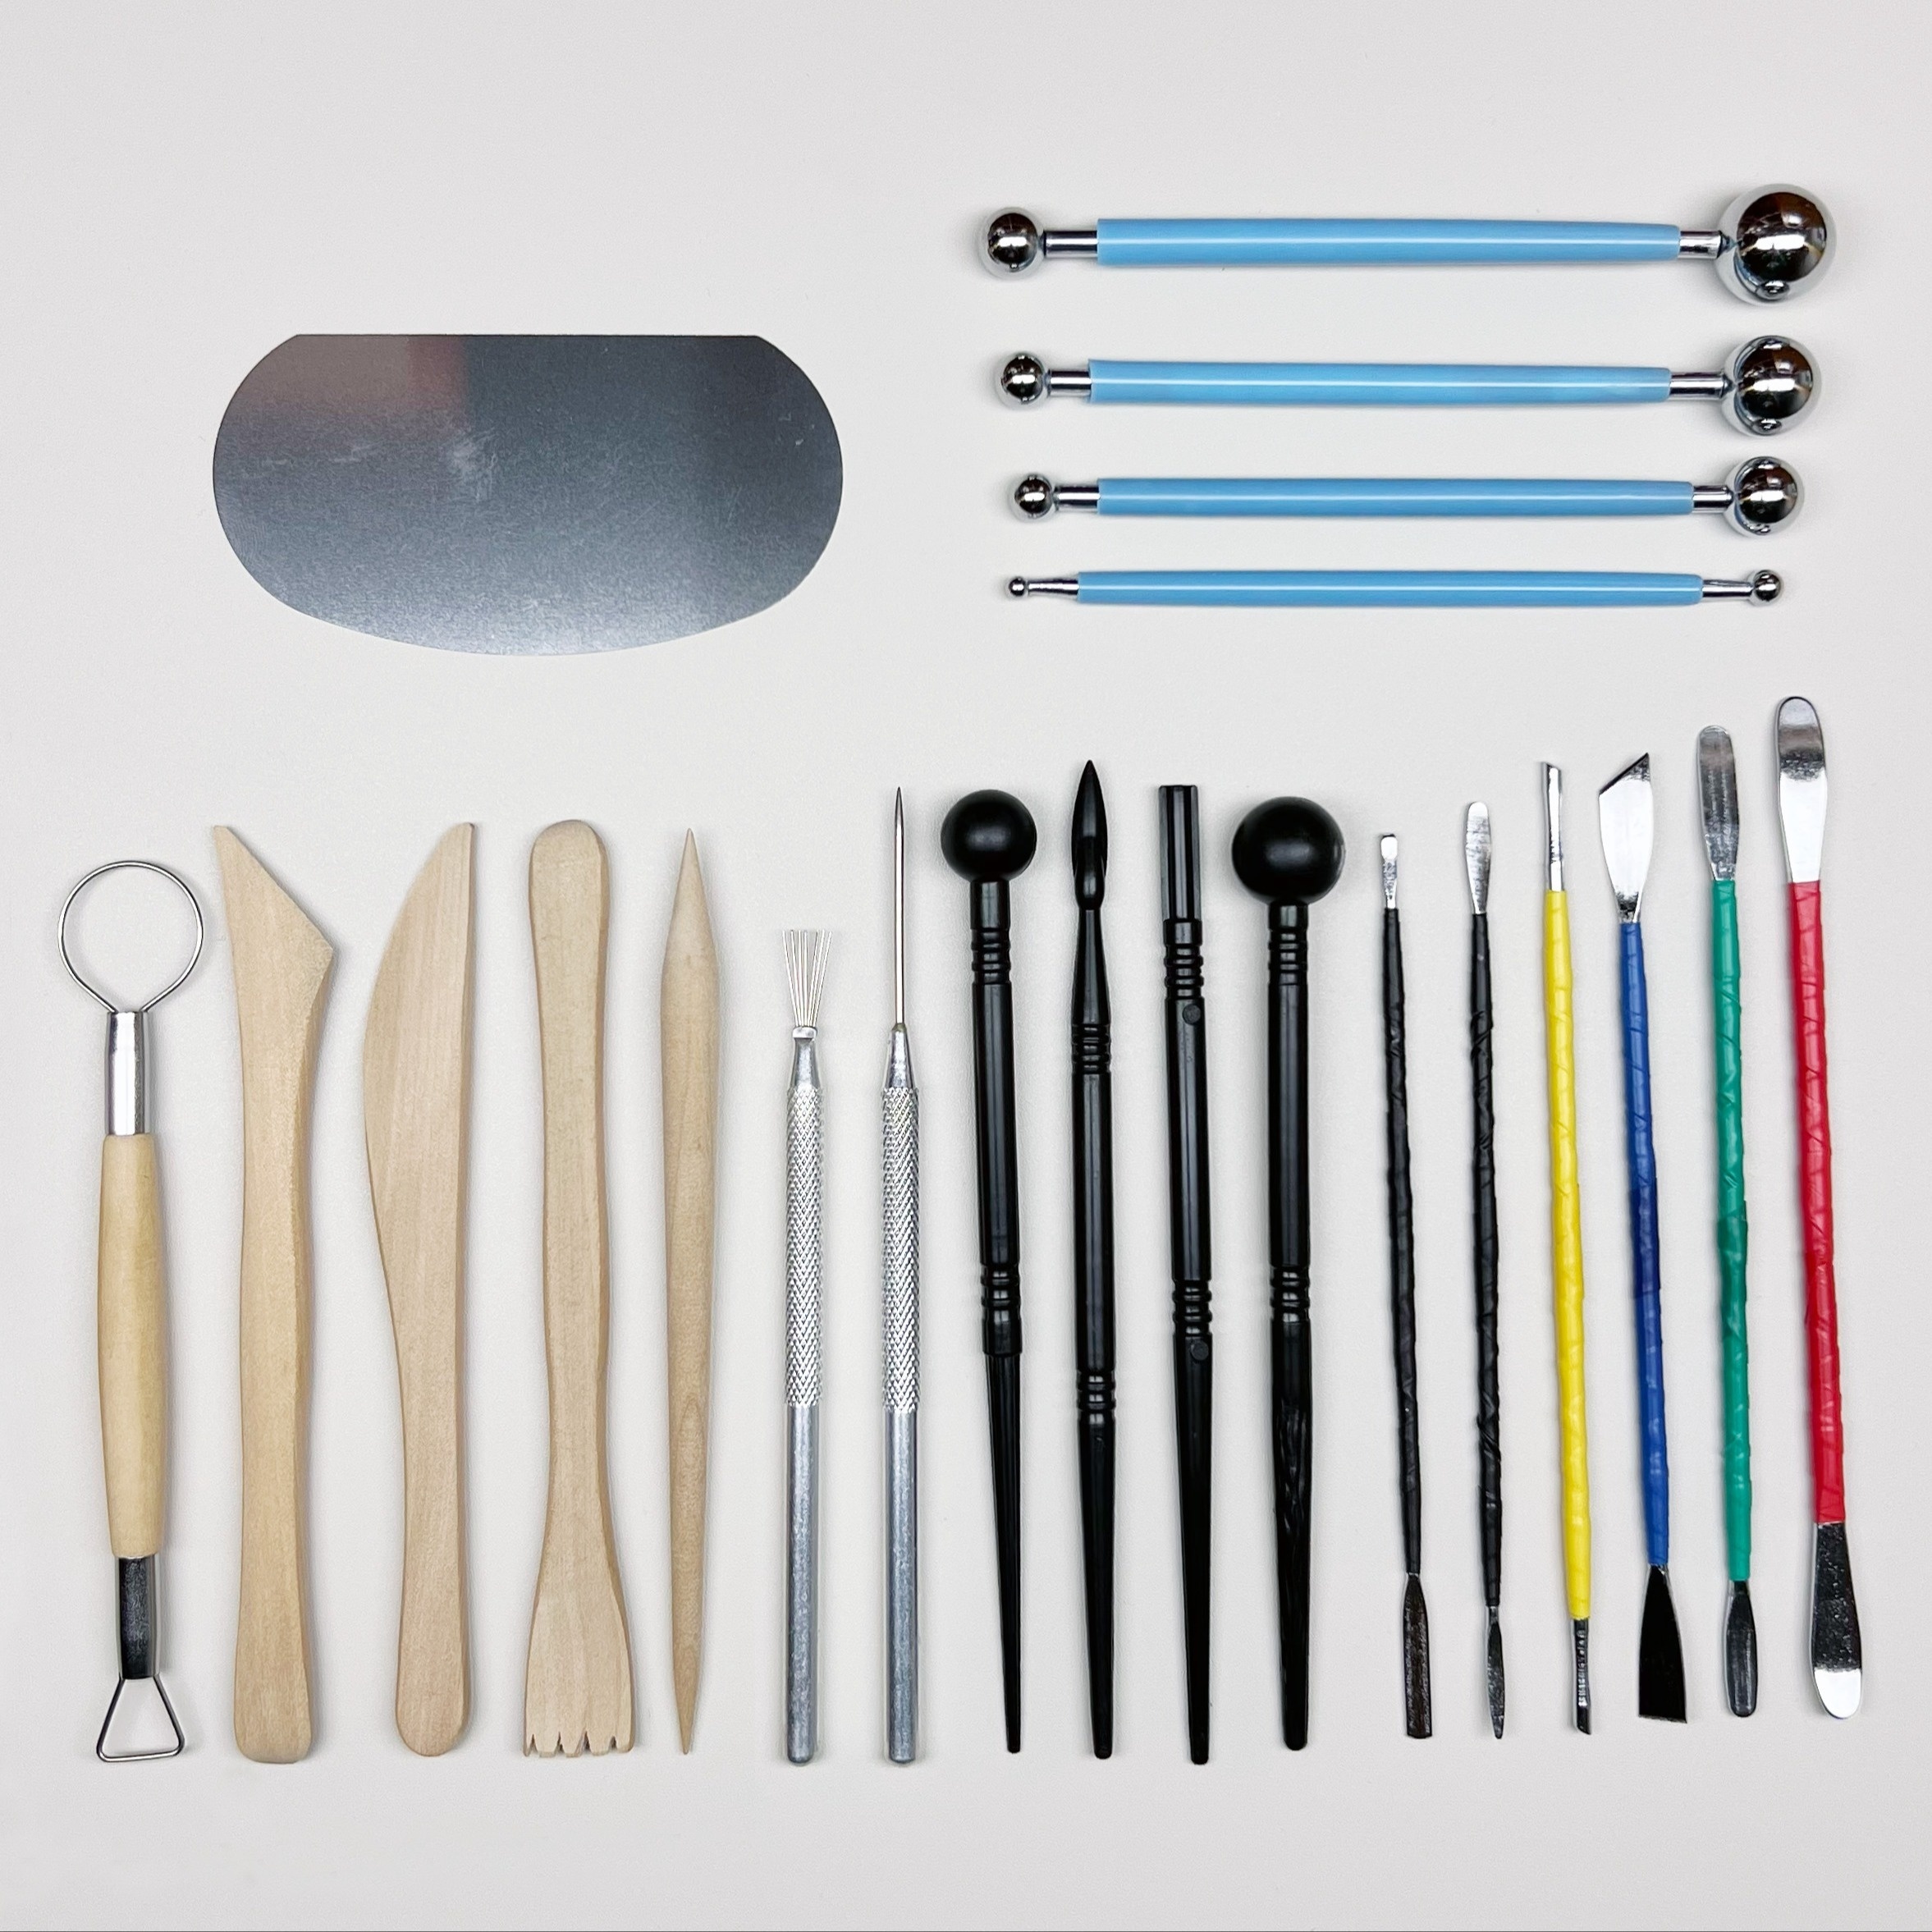 10pcs Clay Sculpting Tools Set Silicone Clay Modelling Tools Polymer Clay  Tools For Pottery Sculpture Cake Fonda Brush Modeling Dotting Nail Art